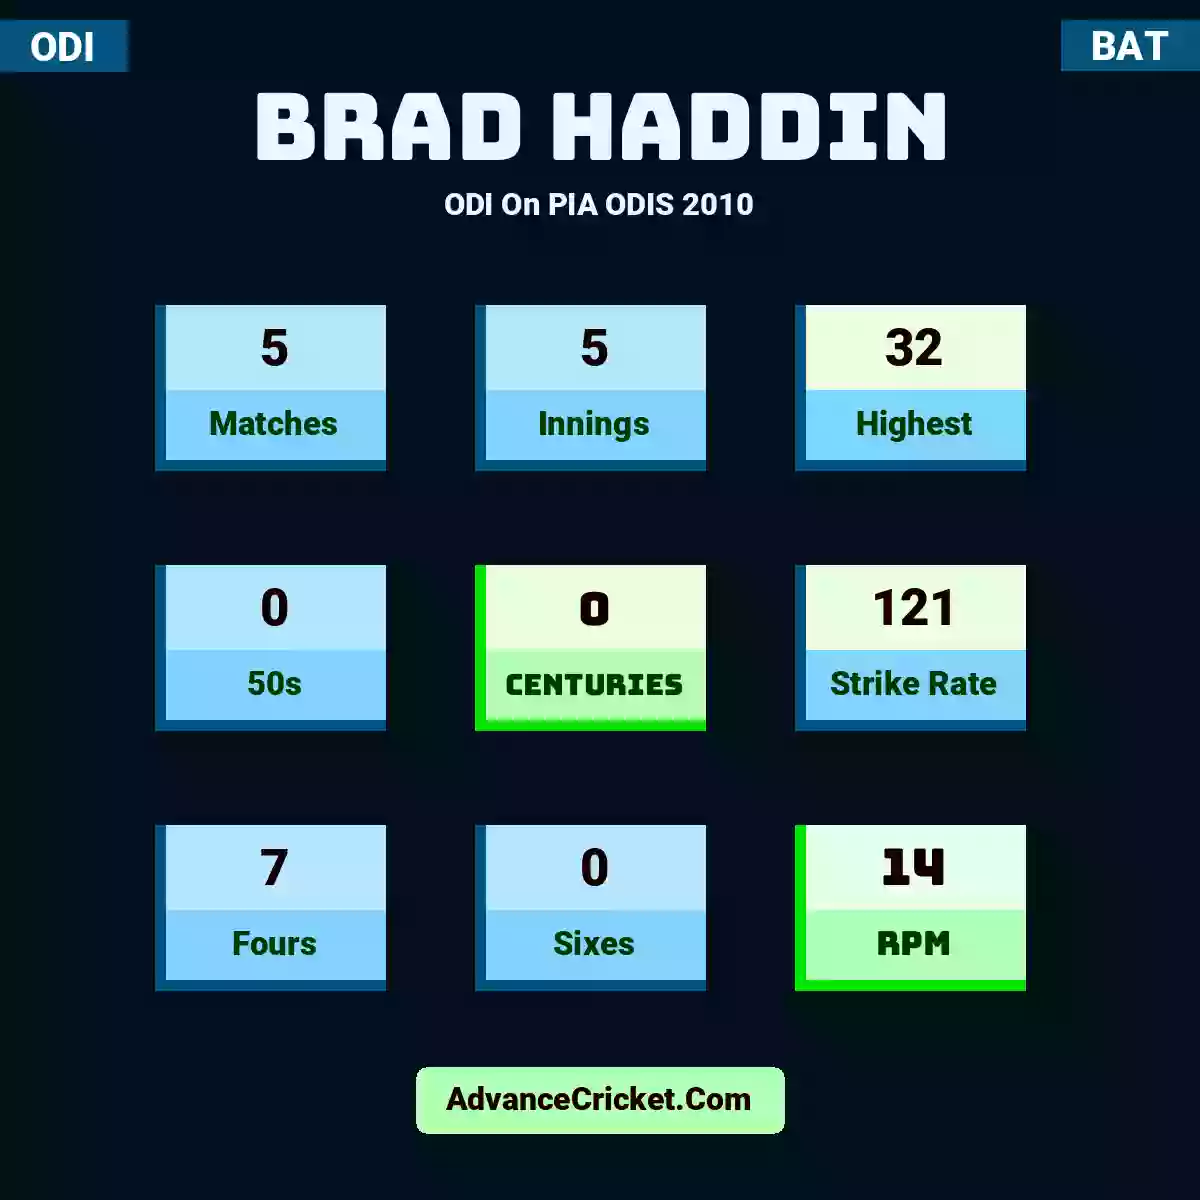 Brad Haddin ODI  On PIA ODIS 2010, Brad Haddin played 5 matches, scored 32 runs as highest, 0 half-centuries, and 0 centuries, with a strike rate of 121. B.Haddin hit 7 fours and 0 sixes, with an RPM of 14.